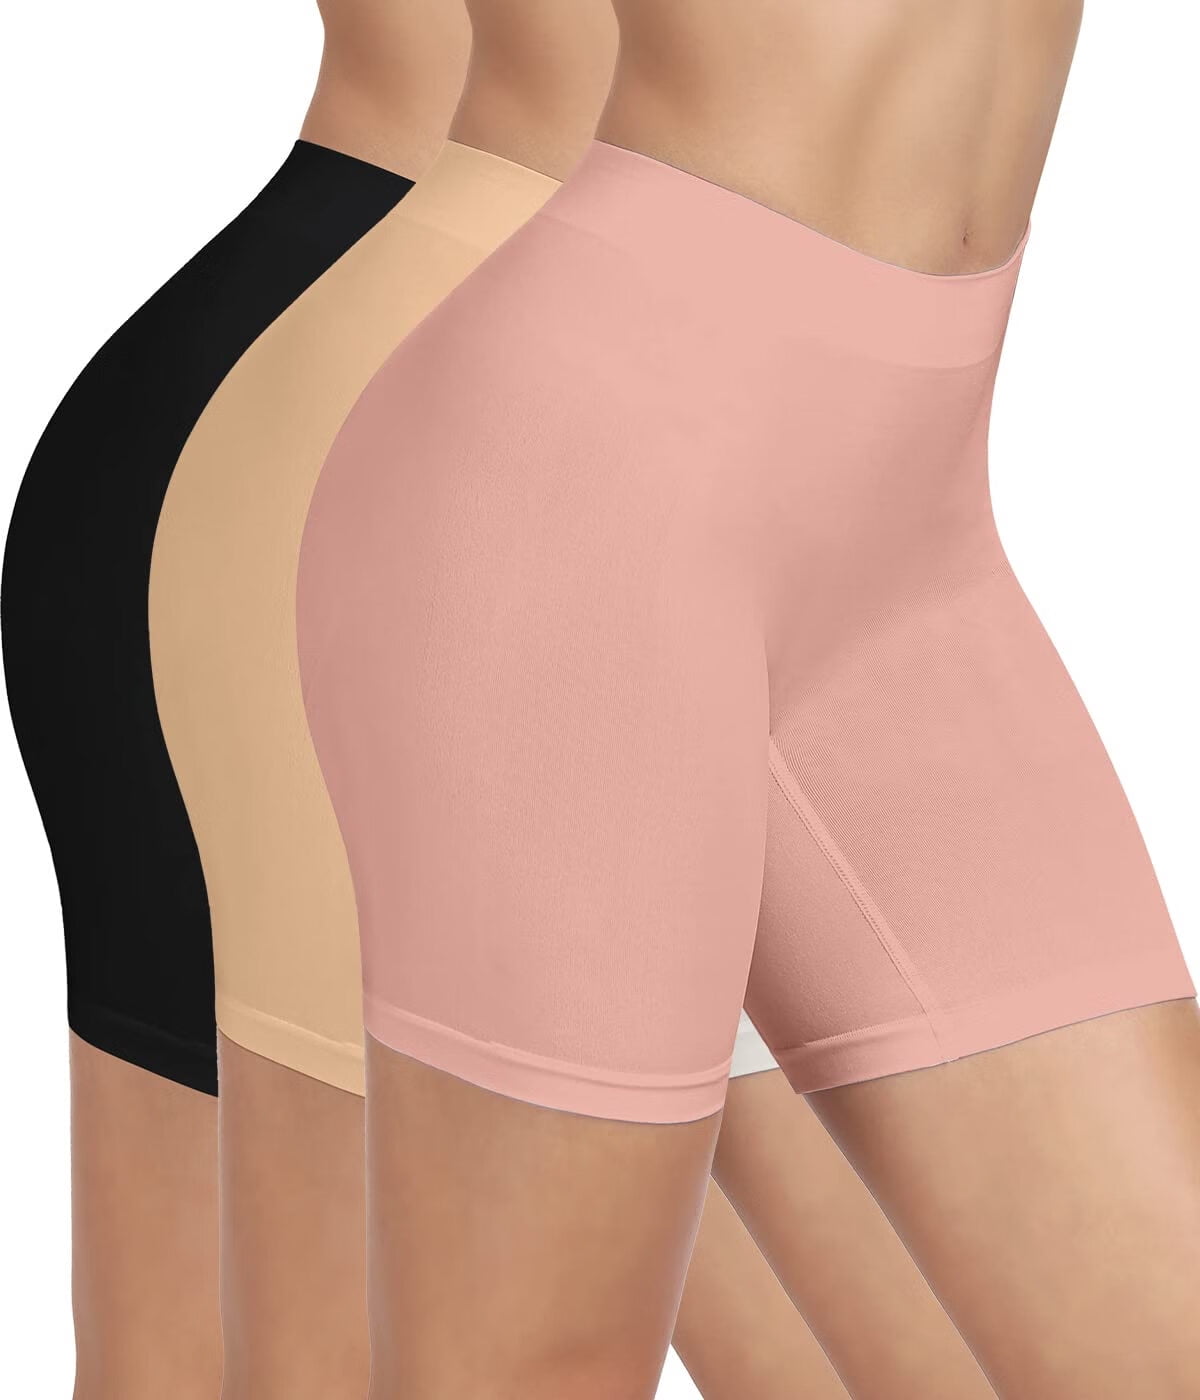 Slip Shorts for Women,Comfortable Smooth Anti Chafing Seamless Underwear  Bike Shorts for Yoga 3-Pack